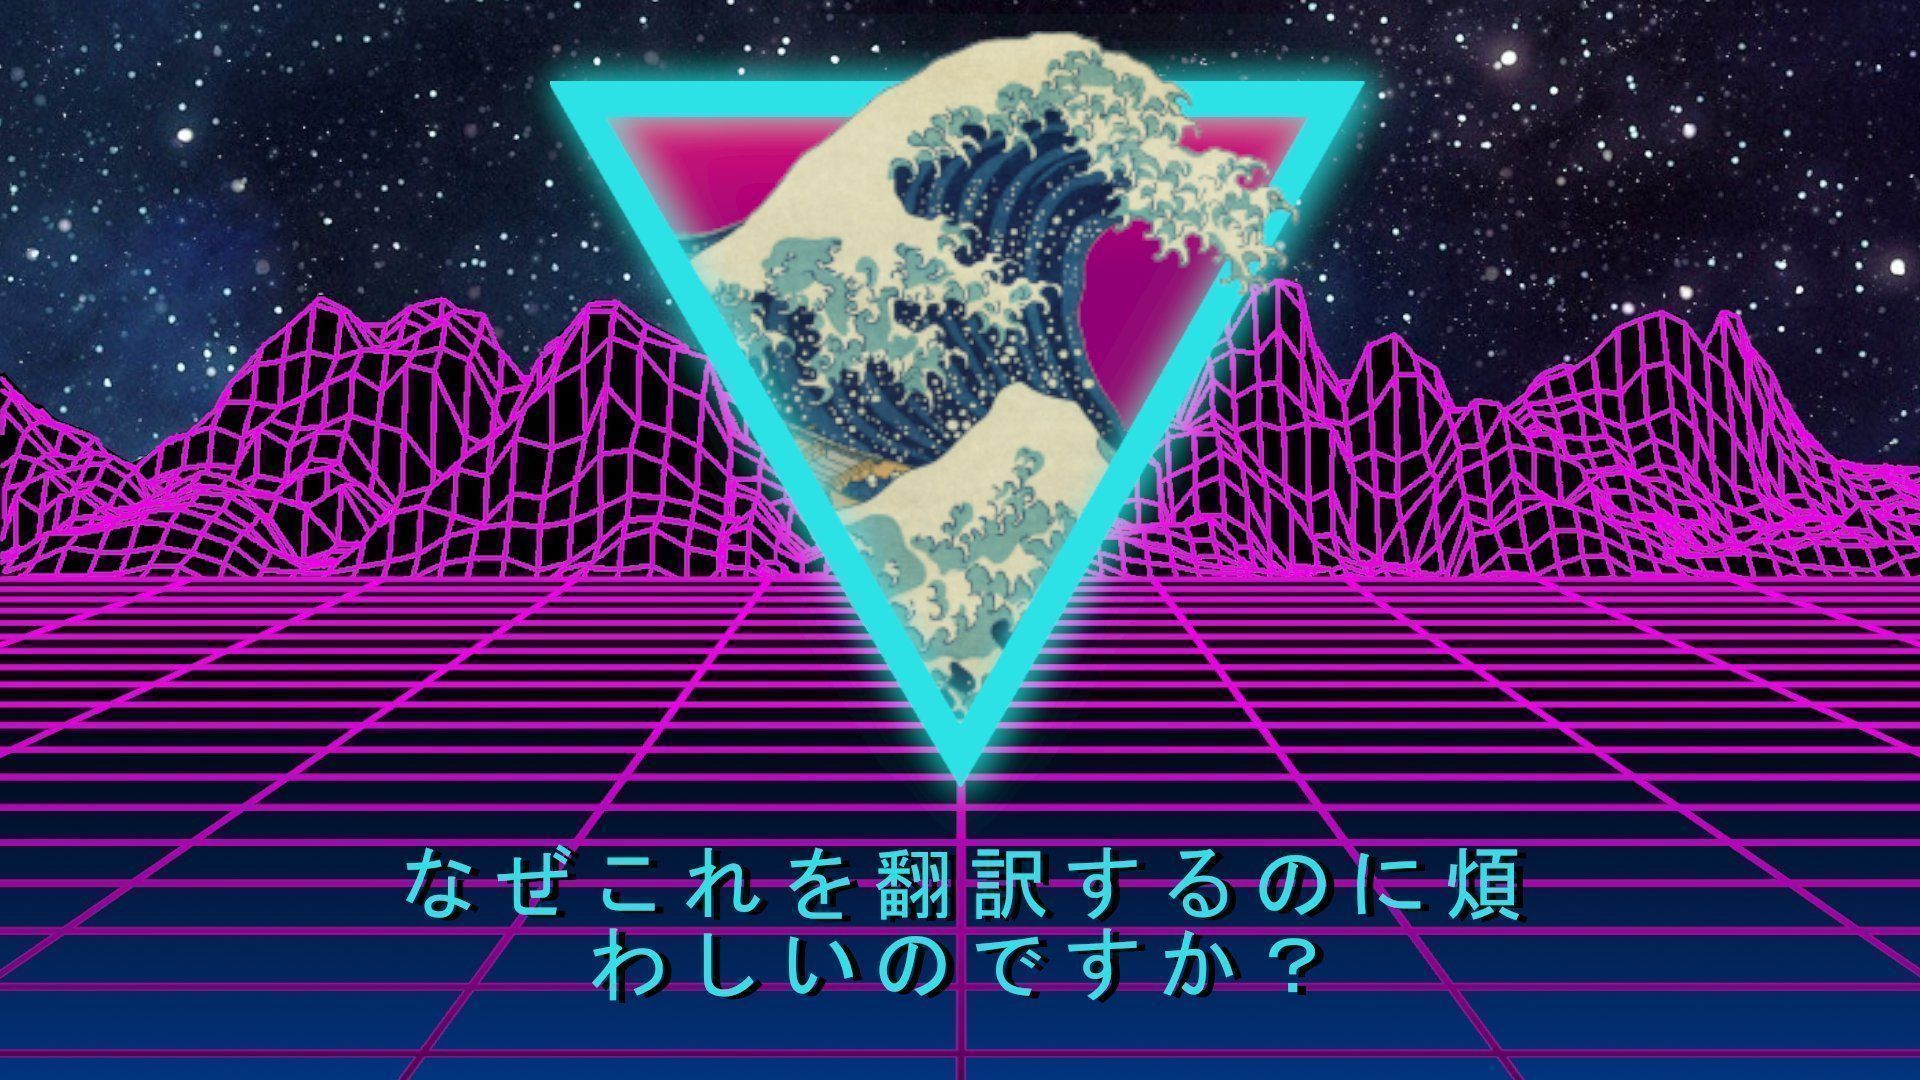 The wave is a retro style poster with an asian theme - Wave, vaporwave, synthwave